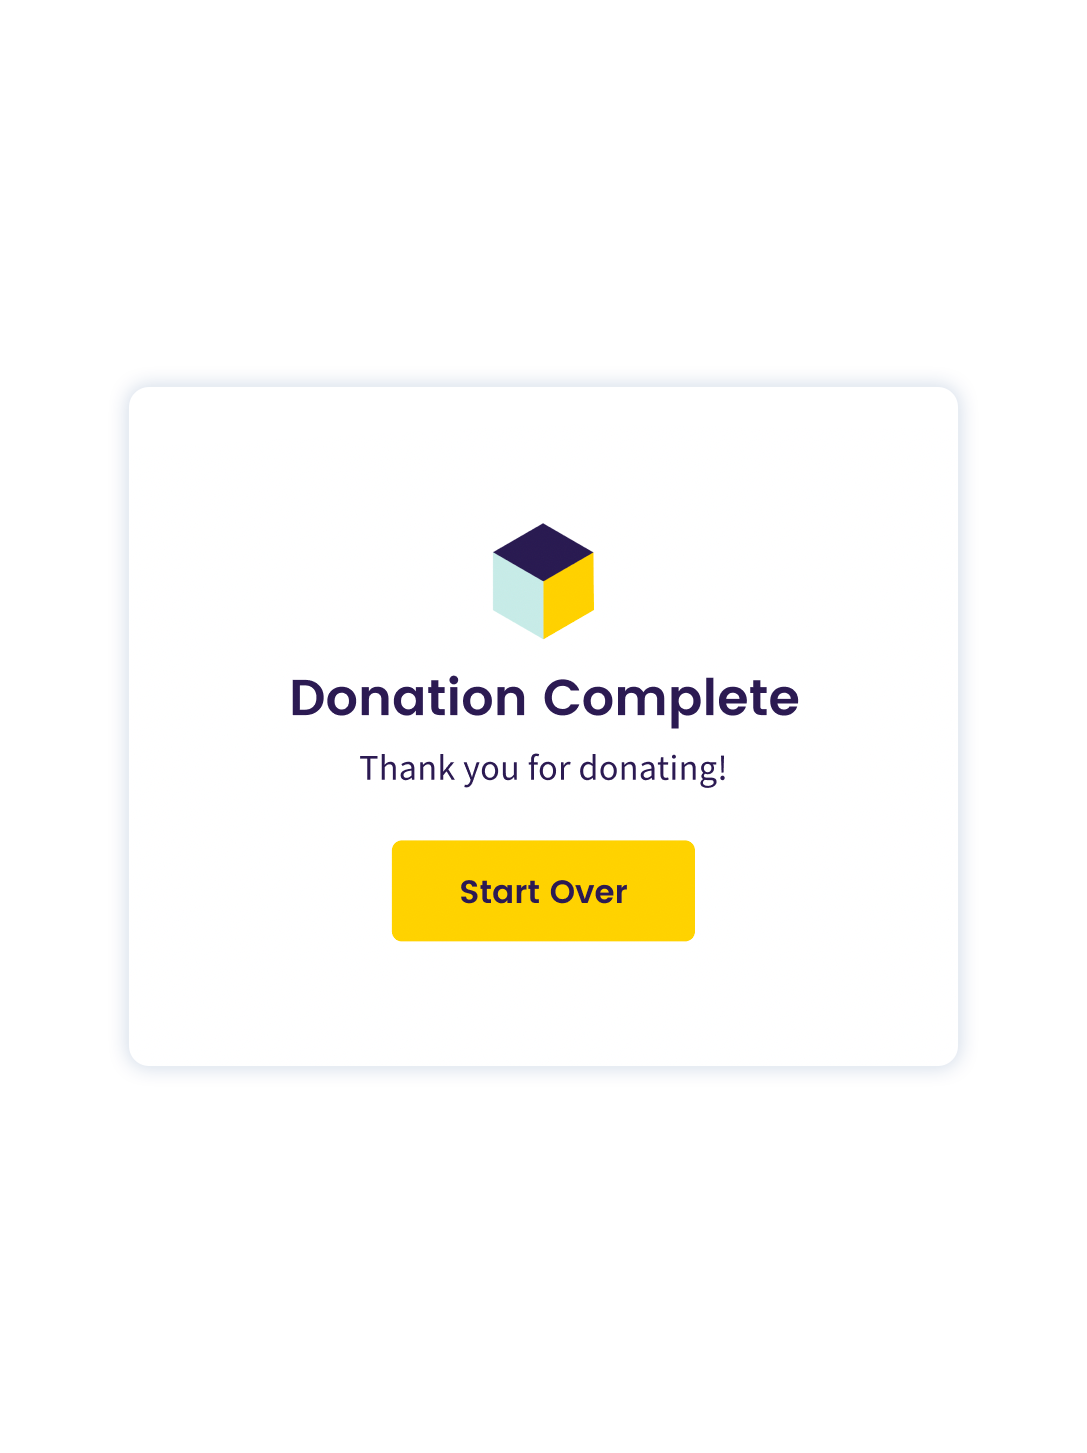 Step 6 - MetaMask Integration - Donation Complete | The Giving Block